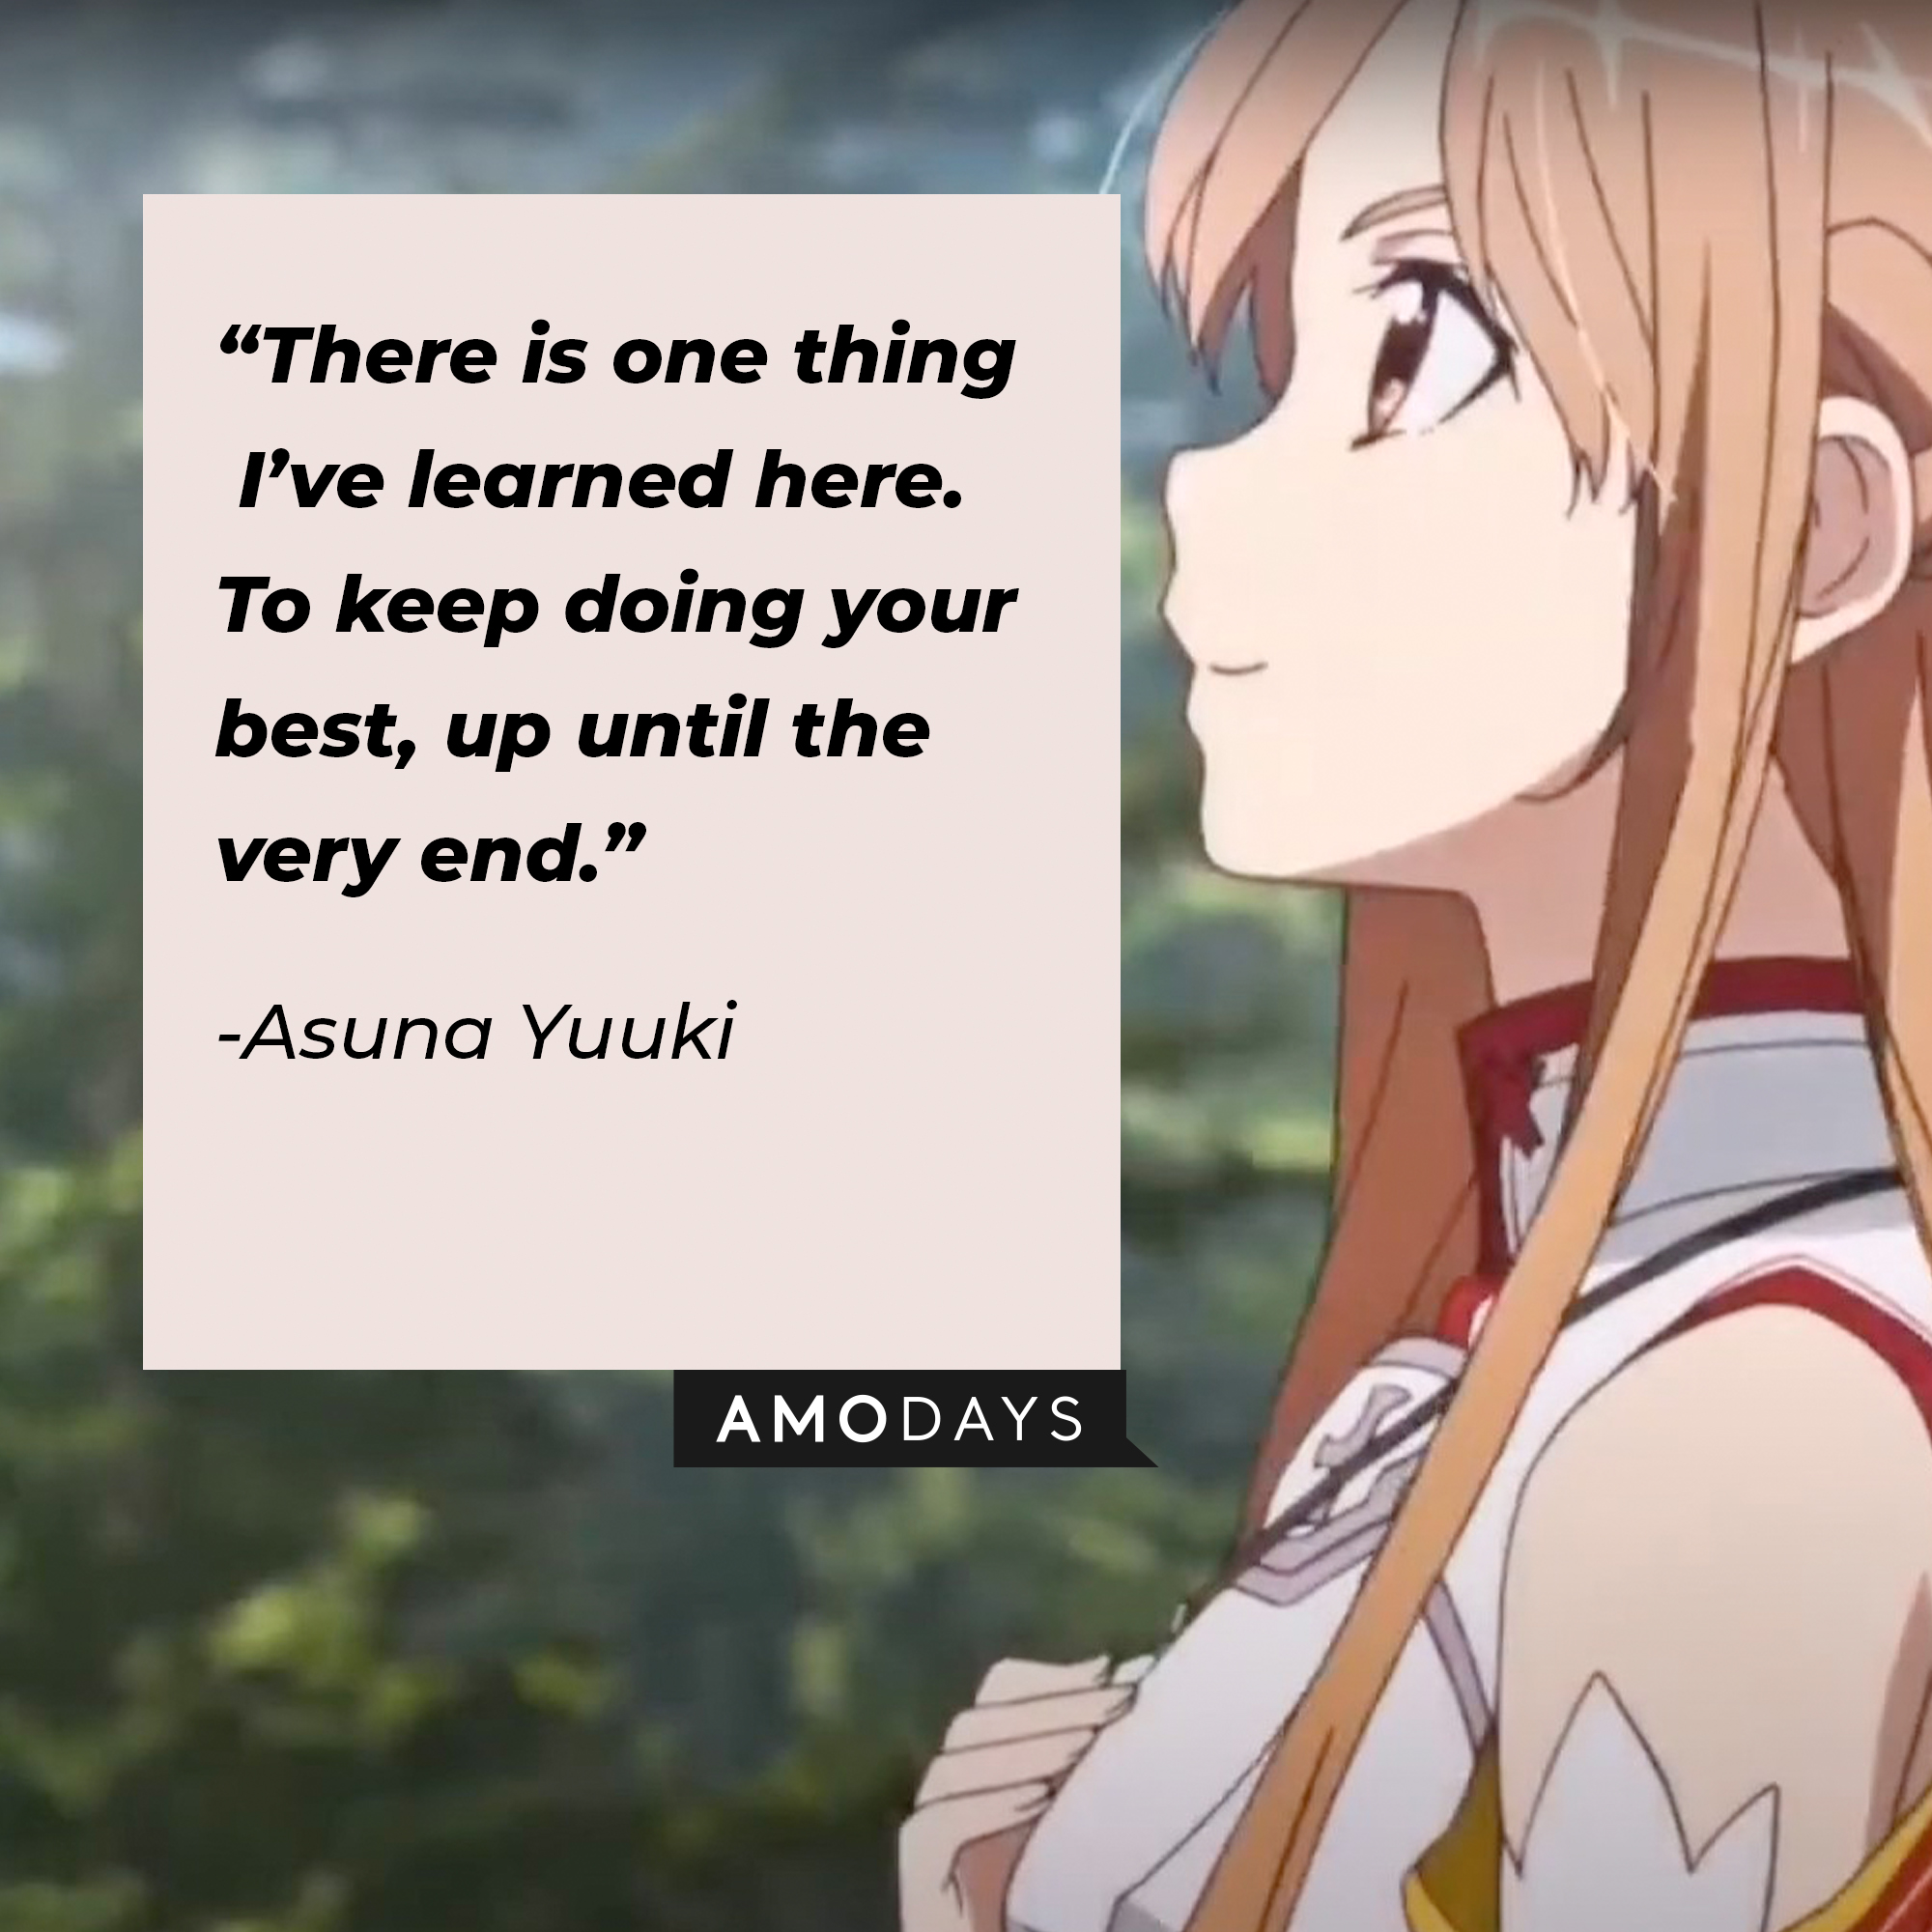 A picture of Asuna Yuuki with her quote: “There is one thing I’ve learned here. To keep doing your best, up until the very end.” | Source: facebook.com/SwordArtOnlineUSA